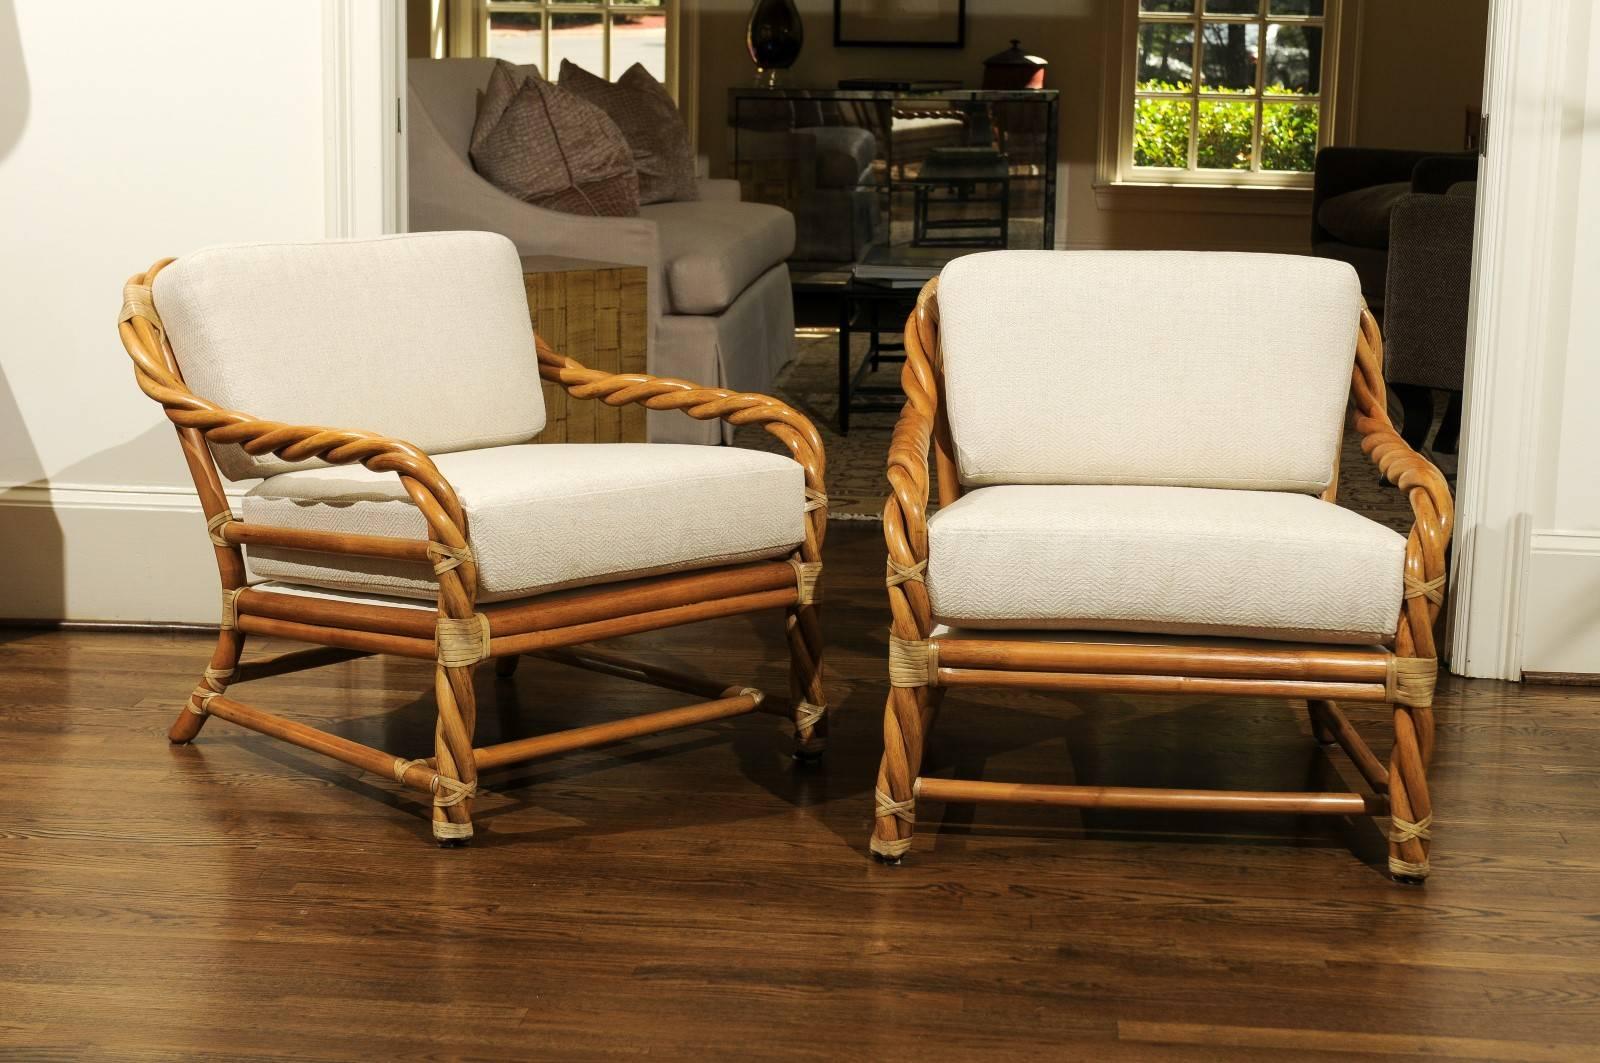 A beautiful pair of loungers from a difficult to find series by McGuire, circa 1980. Clever braided rattan design with binding accents in rawhide. Painstakingly crafted with superb attention to detail. This particular design is coveted by McGuire